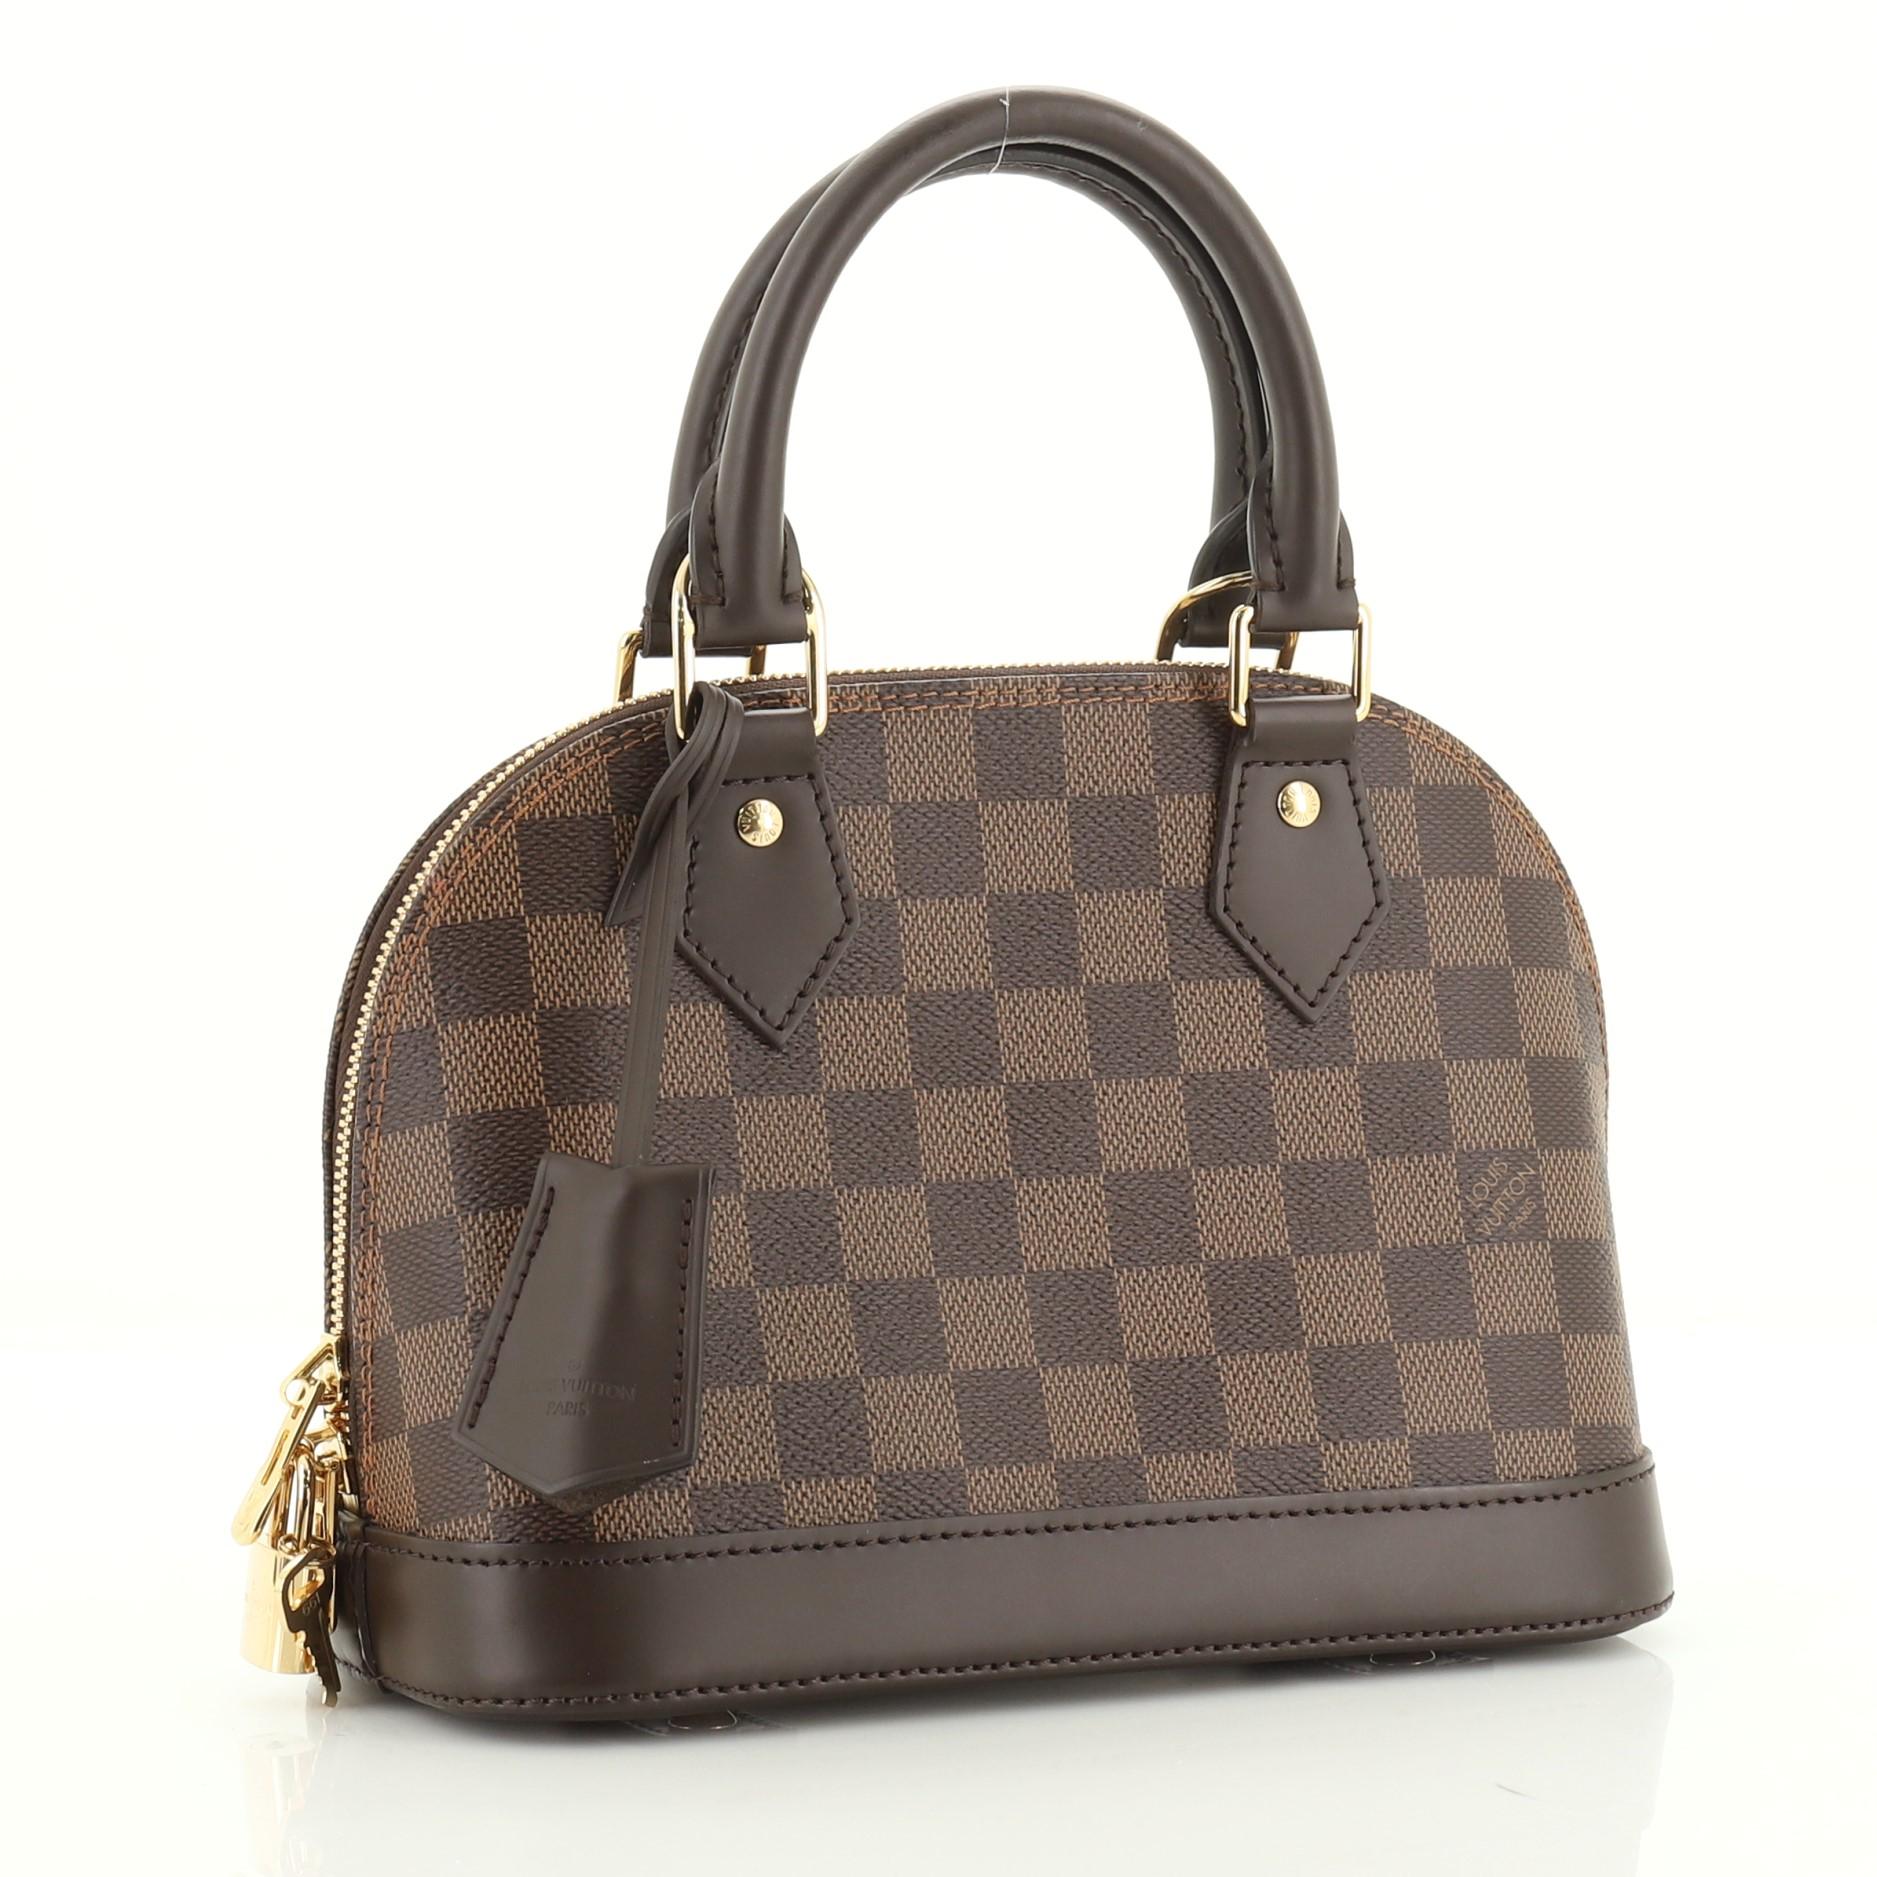 This Louis Vuitton Alma Handbag Damier BB, crafted from damier ebene coated canvas, features dual rolled handles, leather trim, and gold-tone hardware. Its two-way zip closure opens to a red fabric interior with slip pockets. Authenticity code